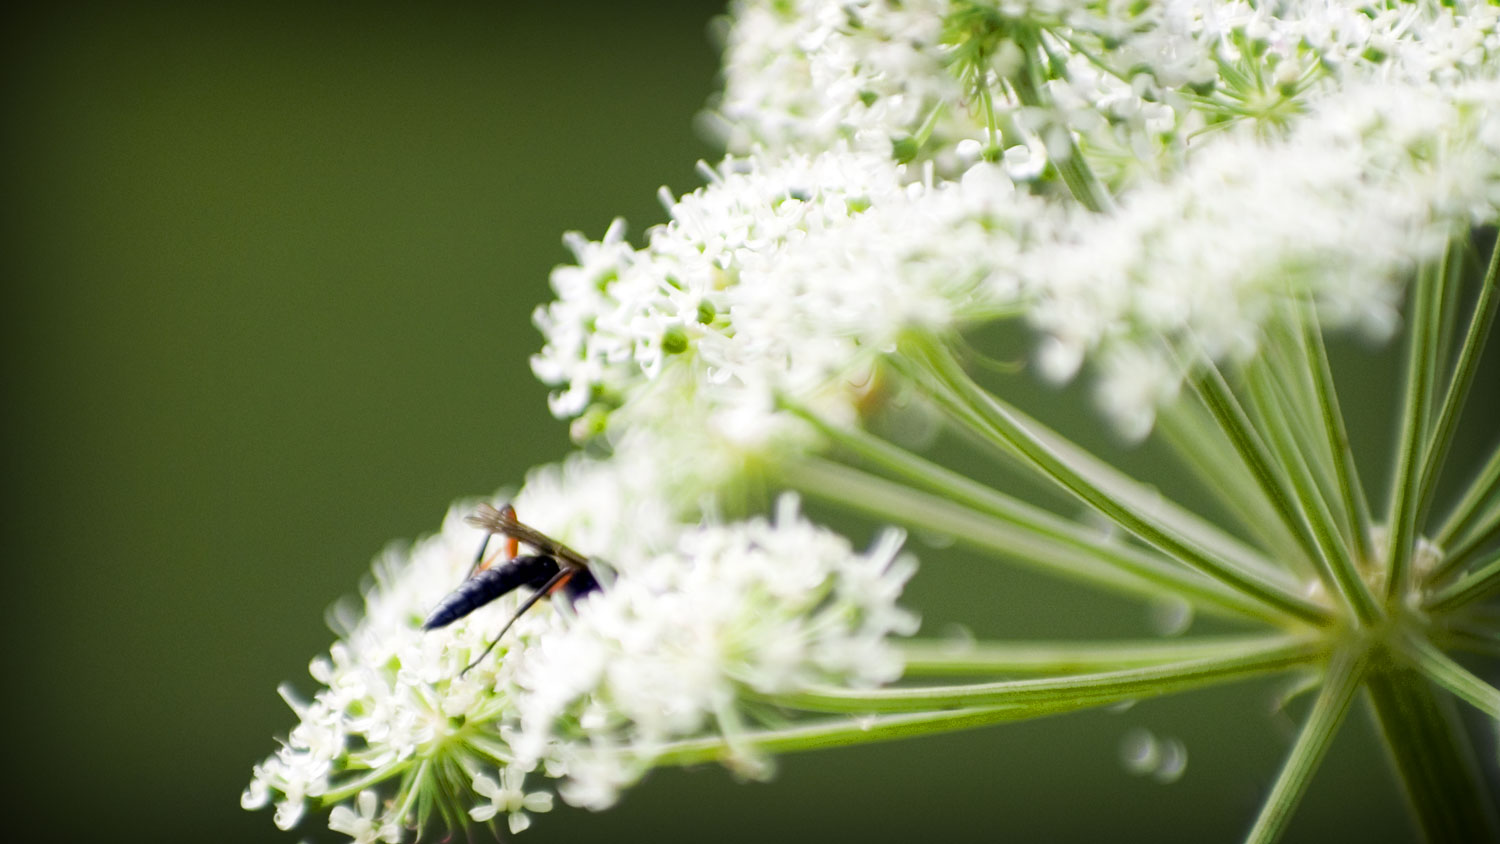 An insect digging into a flower of cow Parsley (Anthriscus sylvestris)